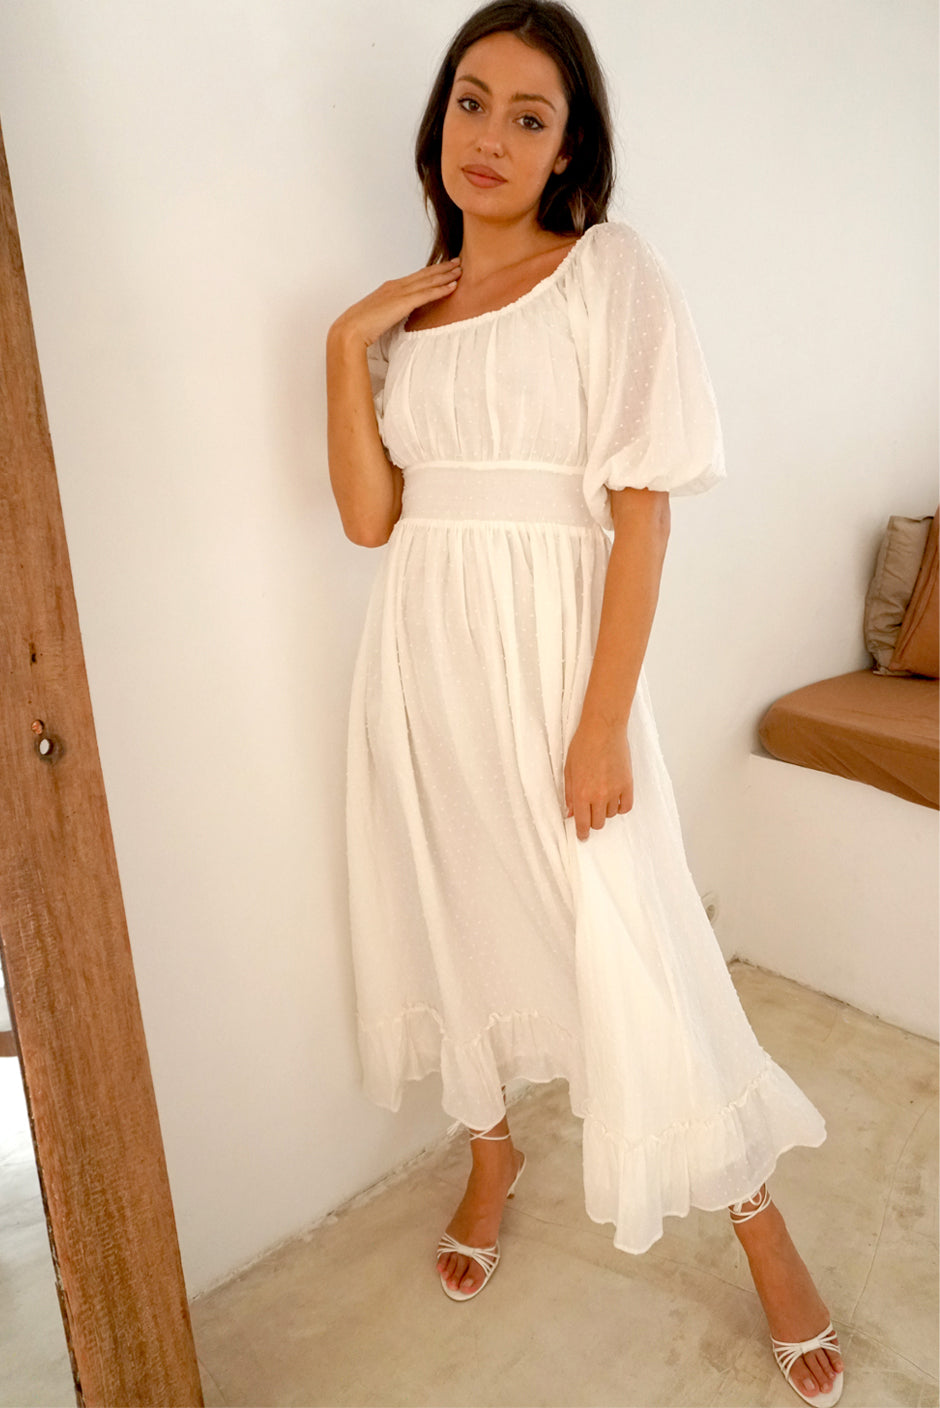 White Cotton Clip Dot Midi Dress for Women with ruffle details, Elbow-length sleeves from Paneros Clothing: the Willow Dress. Front View.